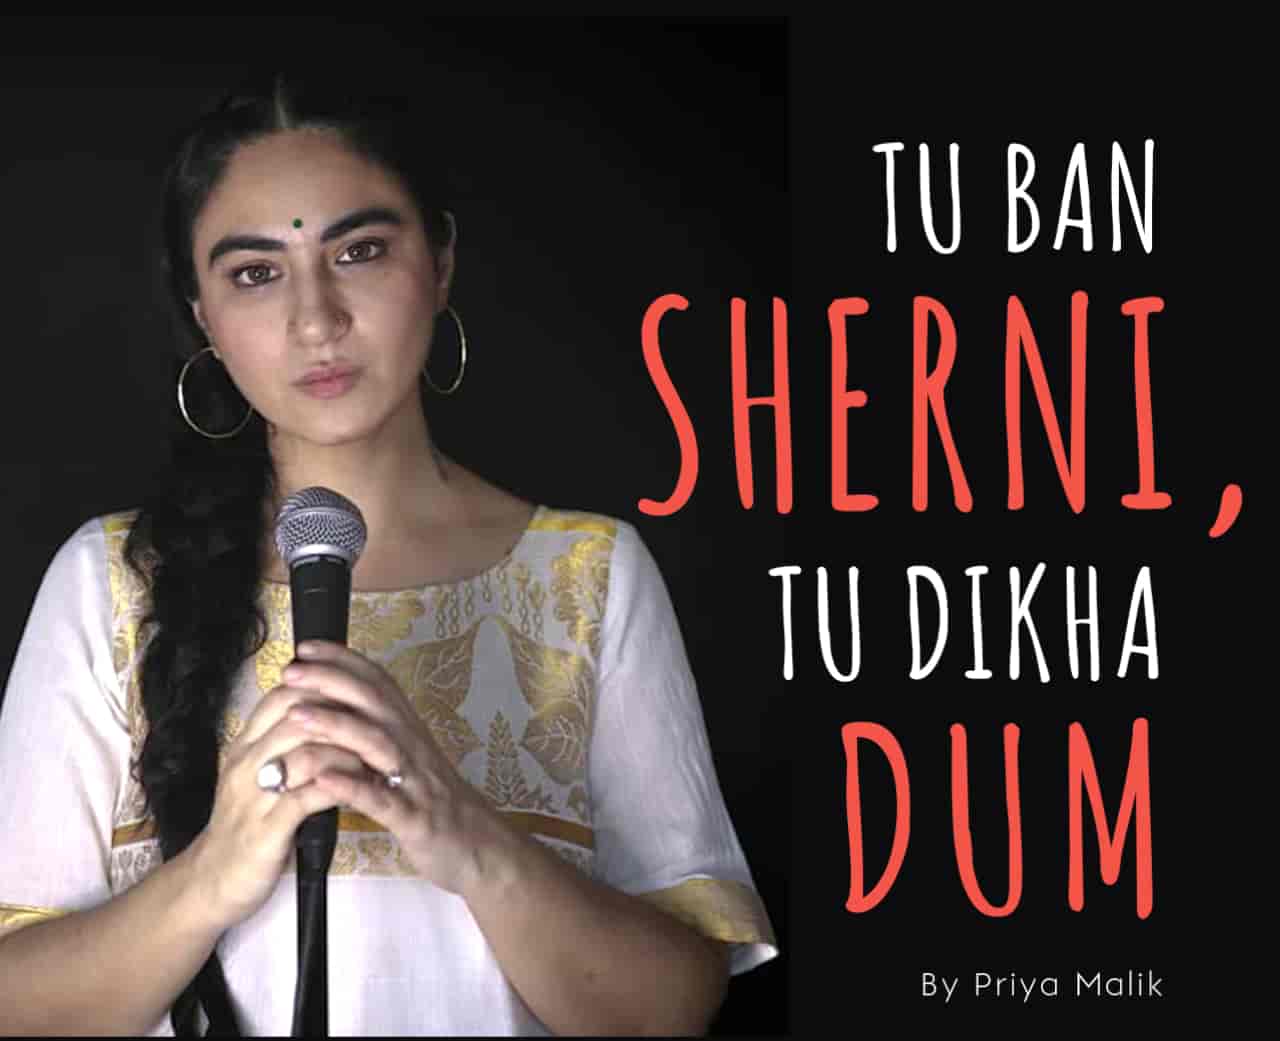 After a long time Priya Malik back with a Hindi poem named "Tu Ban Sherni Tu Dikha Dum". Which is a Hindi poem inspired by a web series show called 'Aarya', written by Priya Malik. Aarya has Susmita Sen in the lead role. In this show she is the mother of three children and the wife of a businessman played by Chandrachur Singh, who is shot dead in broad daylight. She does everything to protect her three children while fighting tough situations.  This poem by Priya Malik inspires women to become frank and strong.